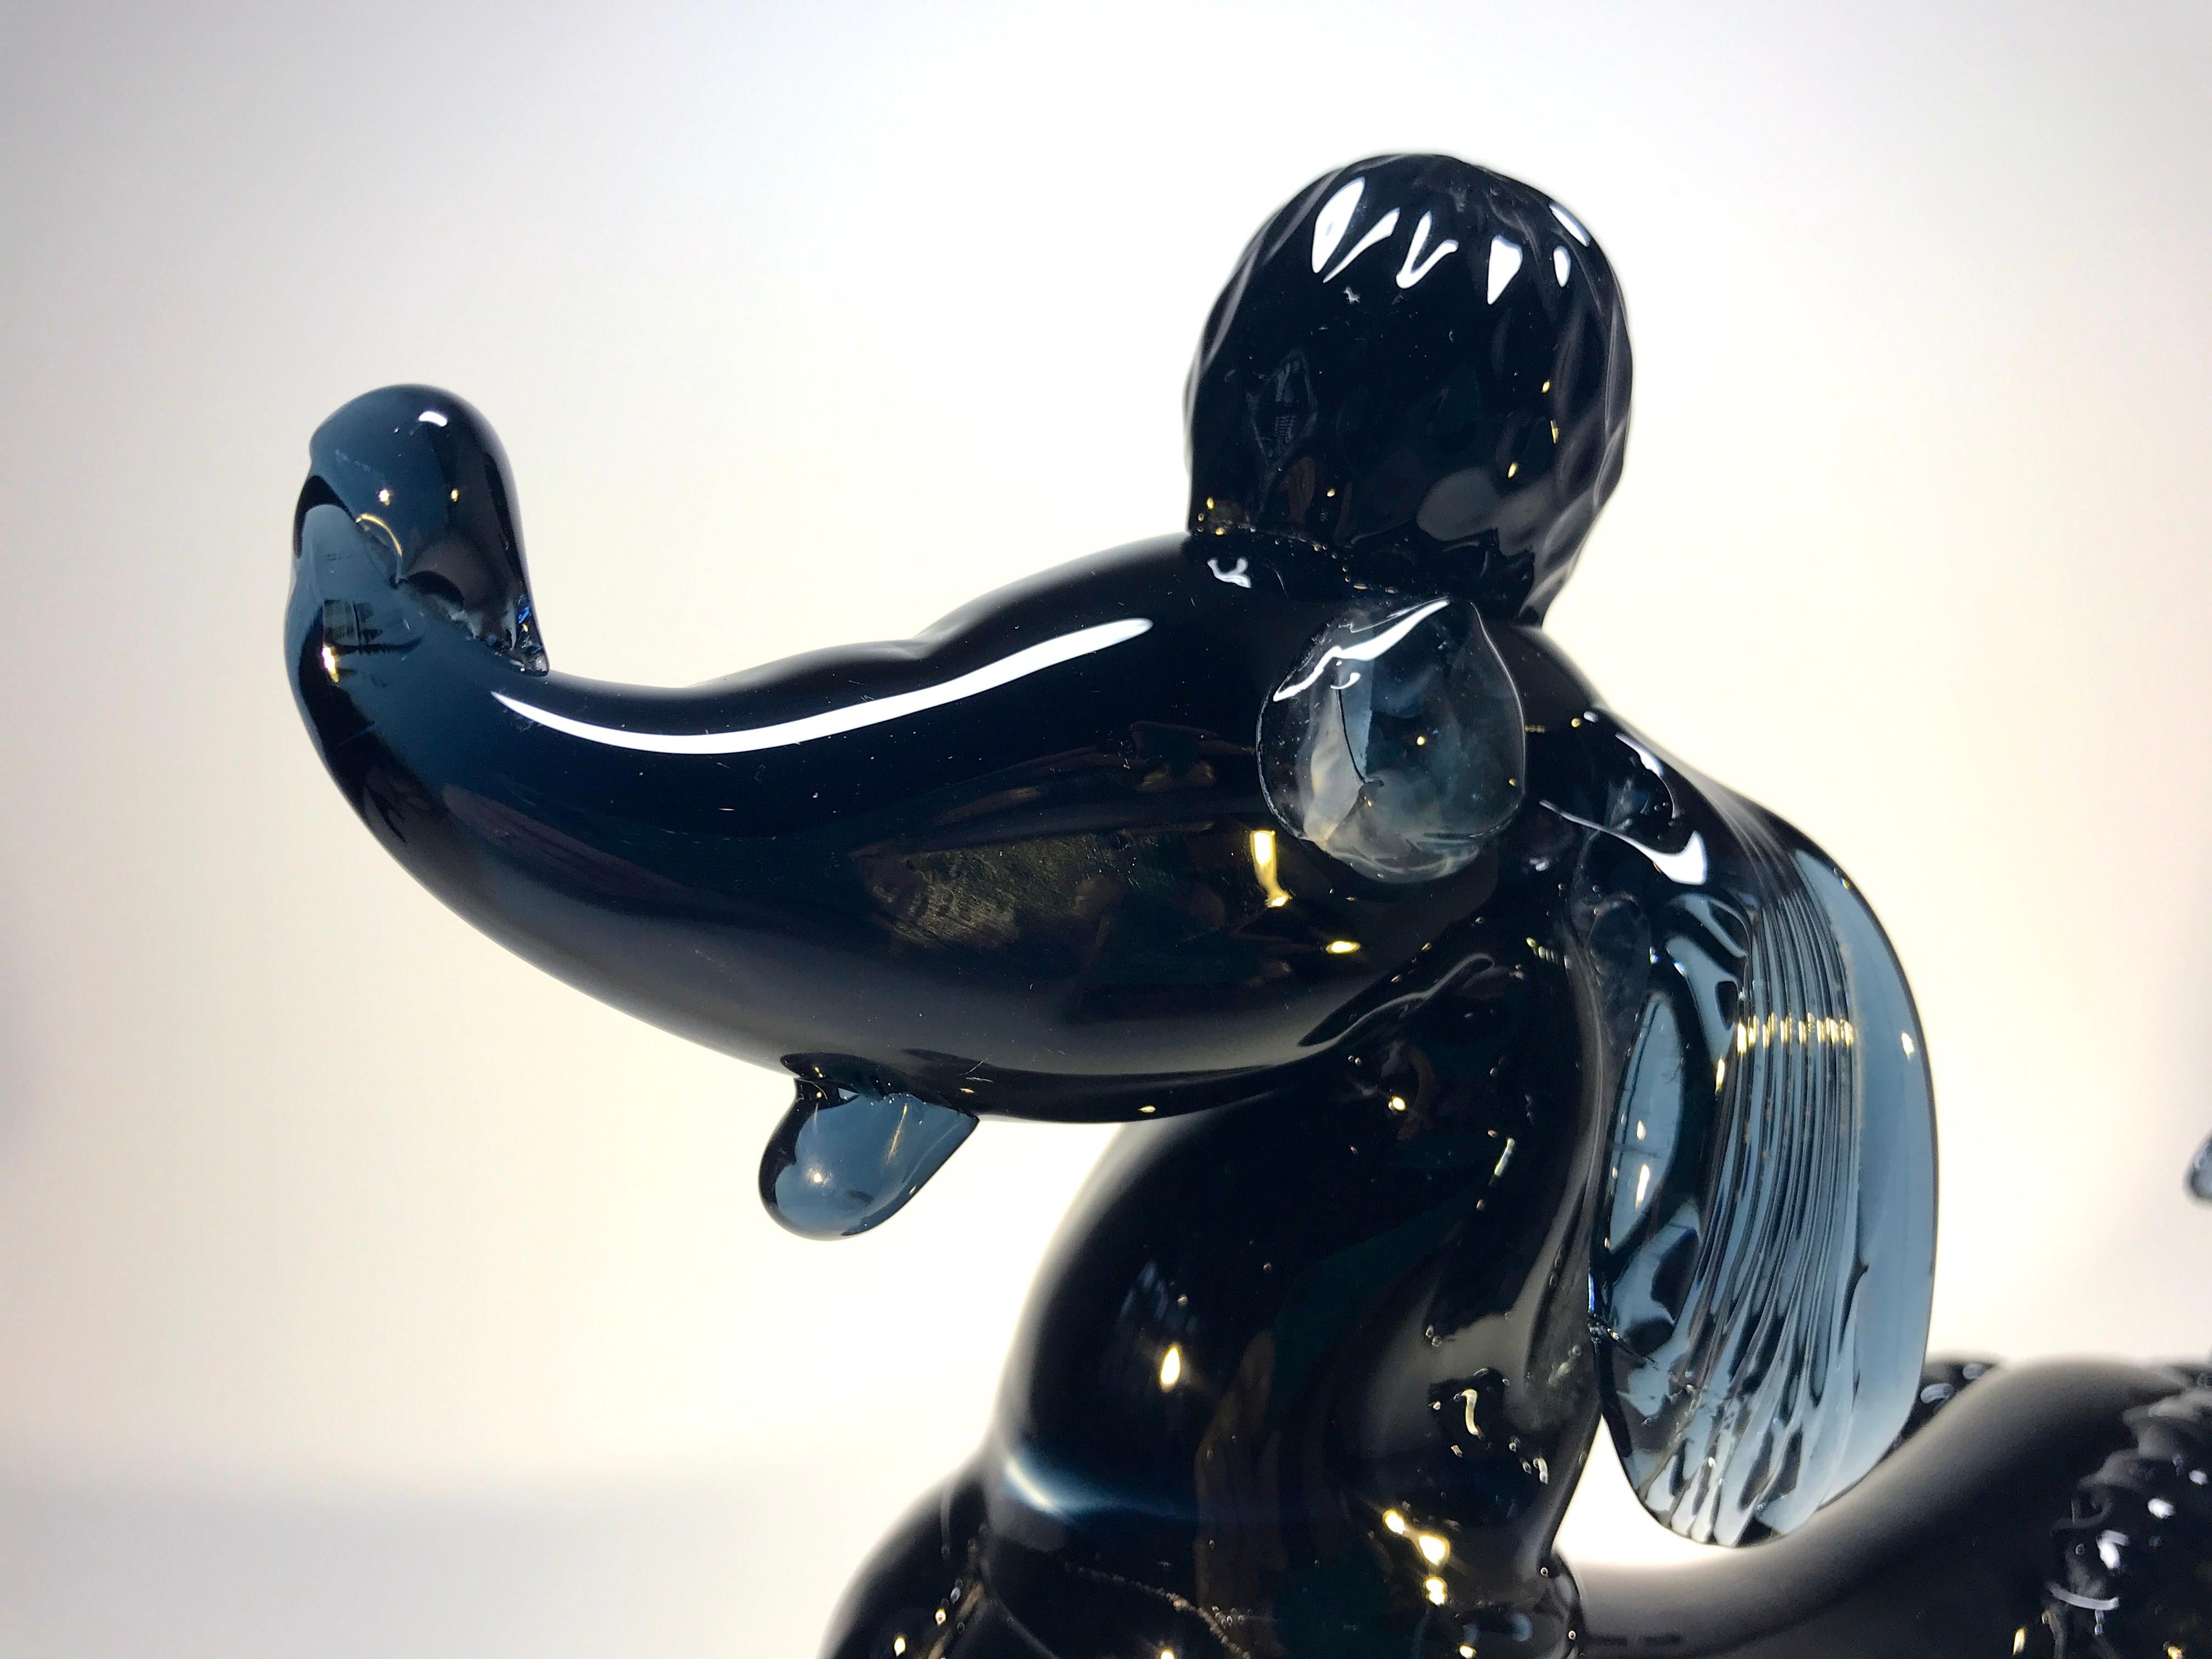 A fabulous and stunning French Poodle figure from Murano glass - oozing Parisian chic!
The color is Midnight blue, almost black- with a hint of indigo
This piece has massive presence,
circa 1960s
Substantial and weighty
Measures: Height 8.25